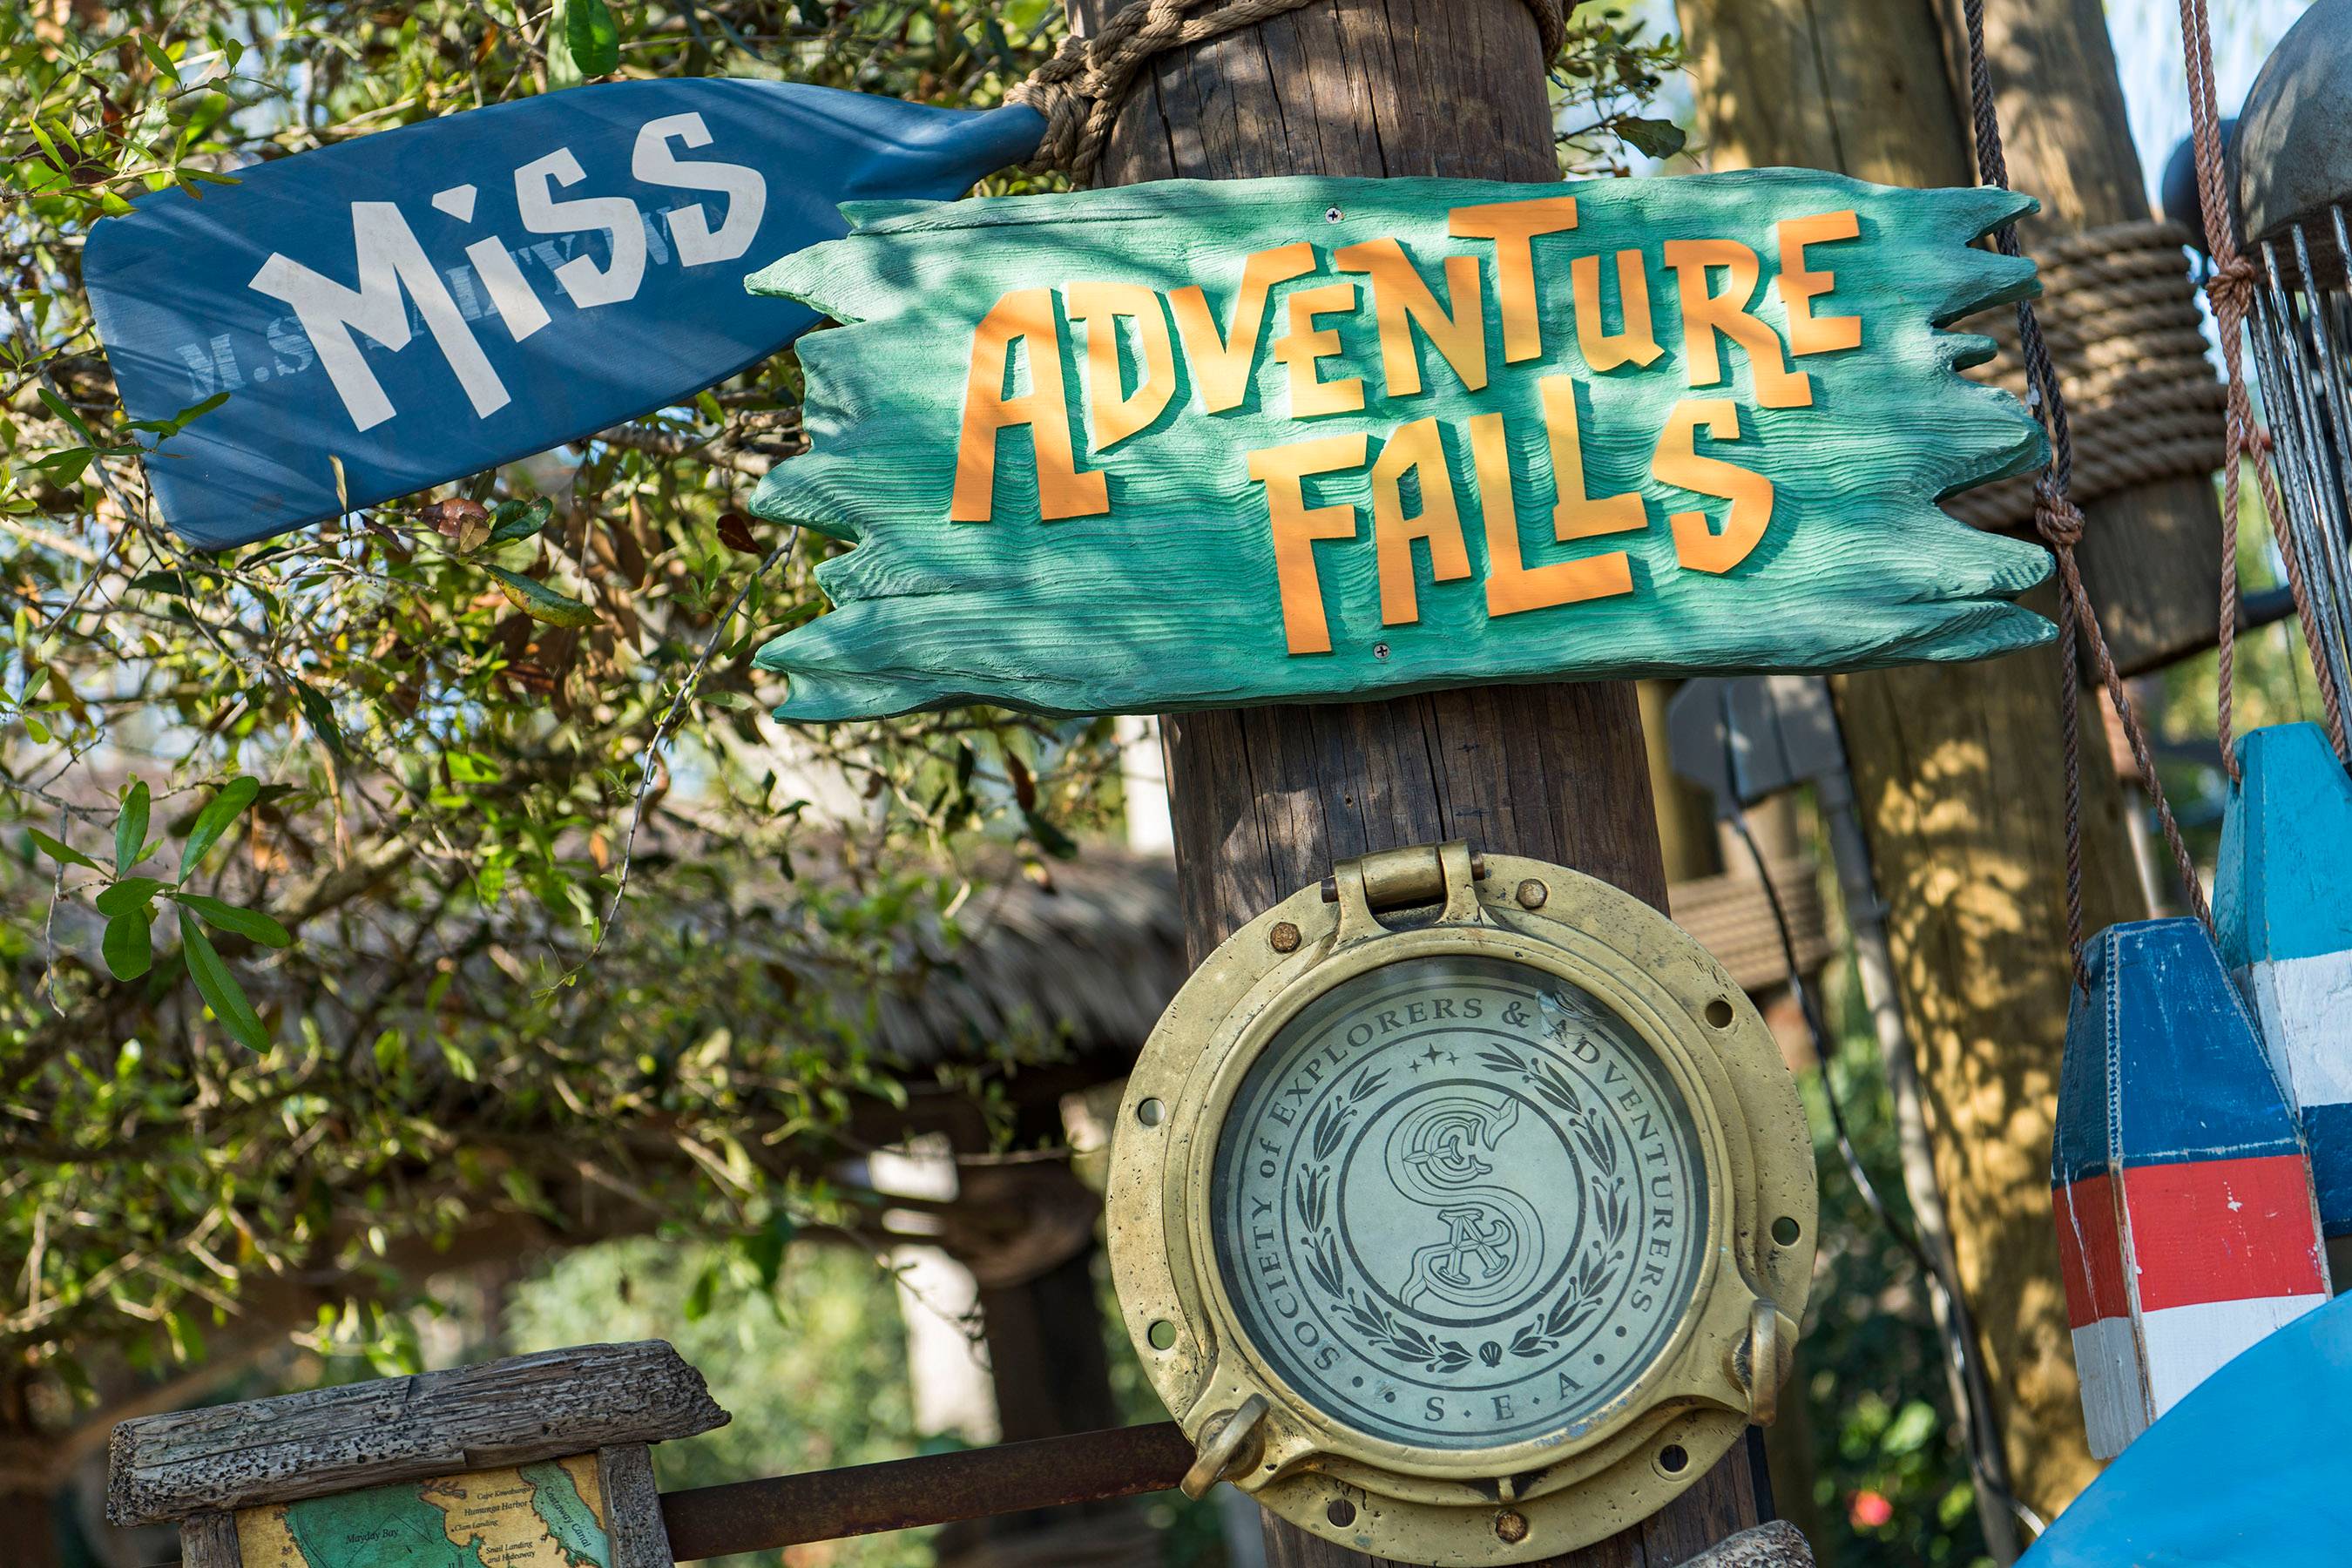 Miss Adventure Falls remains closed after accident before Christmas